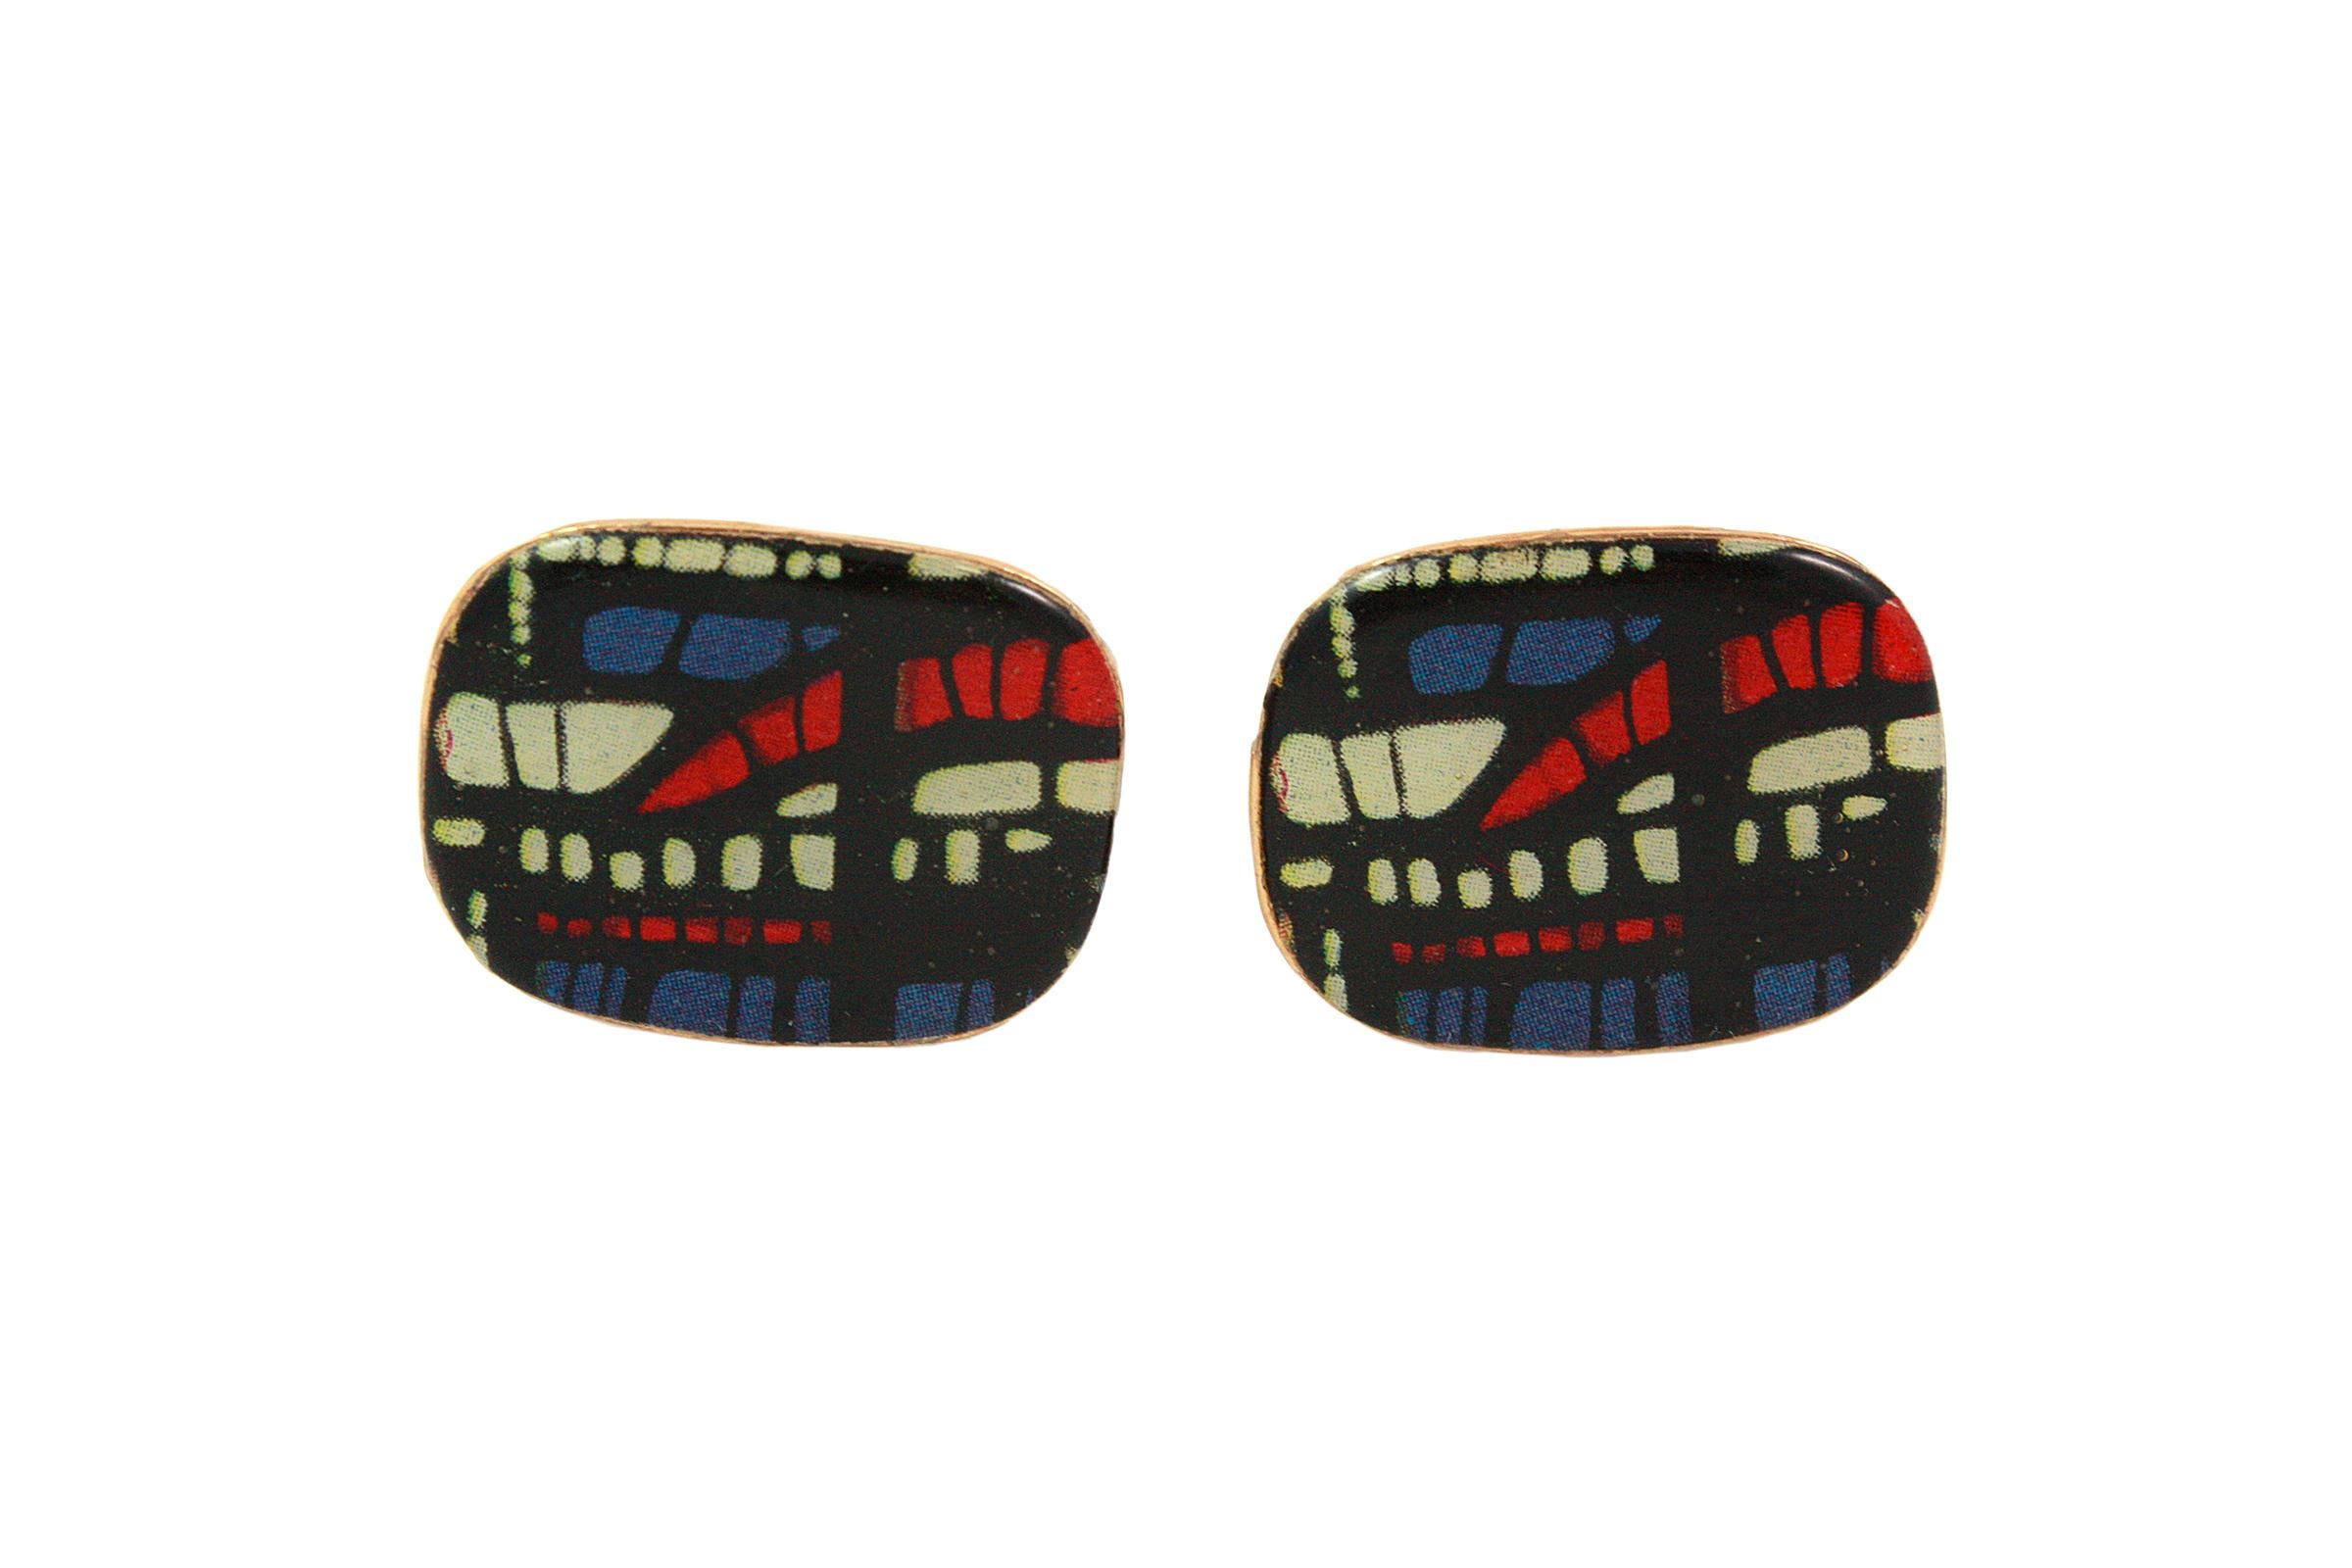 Curved rectangular gold tone gold vermeil over Silver cufflinks 
Black, white, red and blue pattern
Made in France 
Unknown designer
